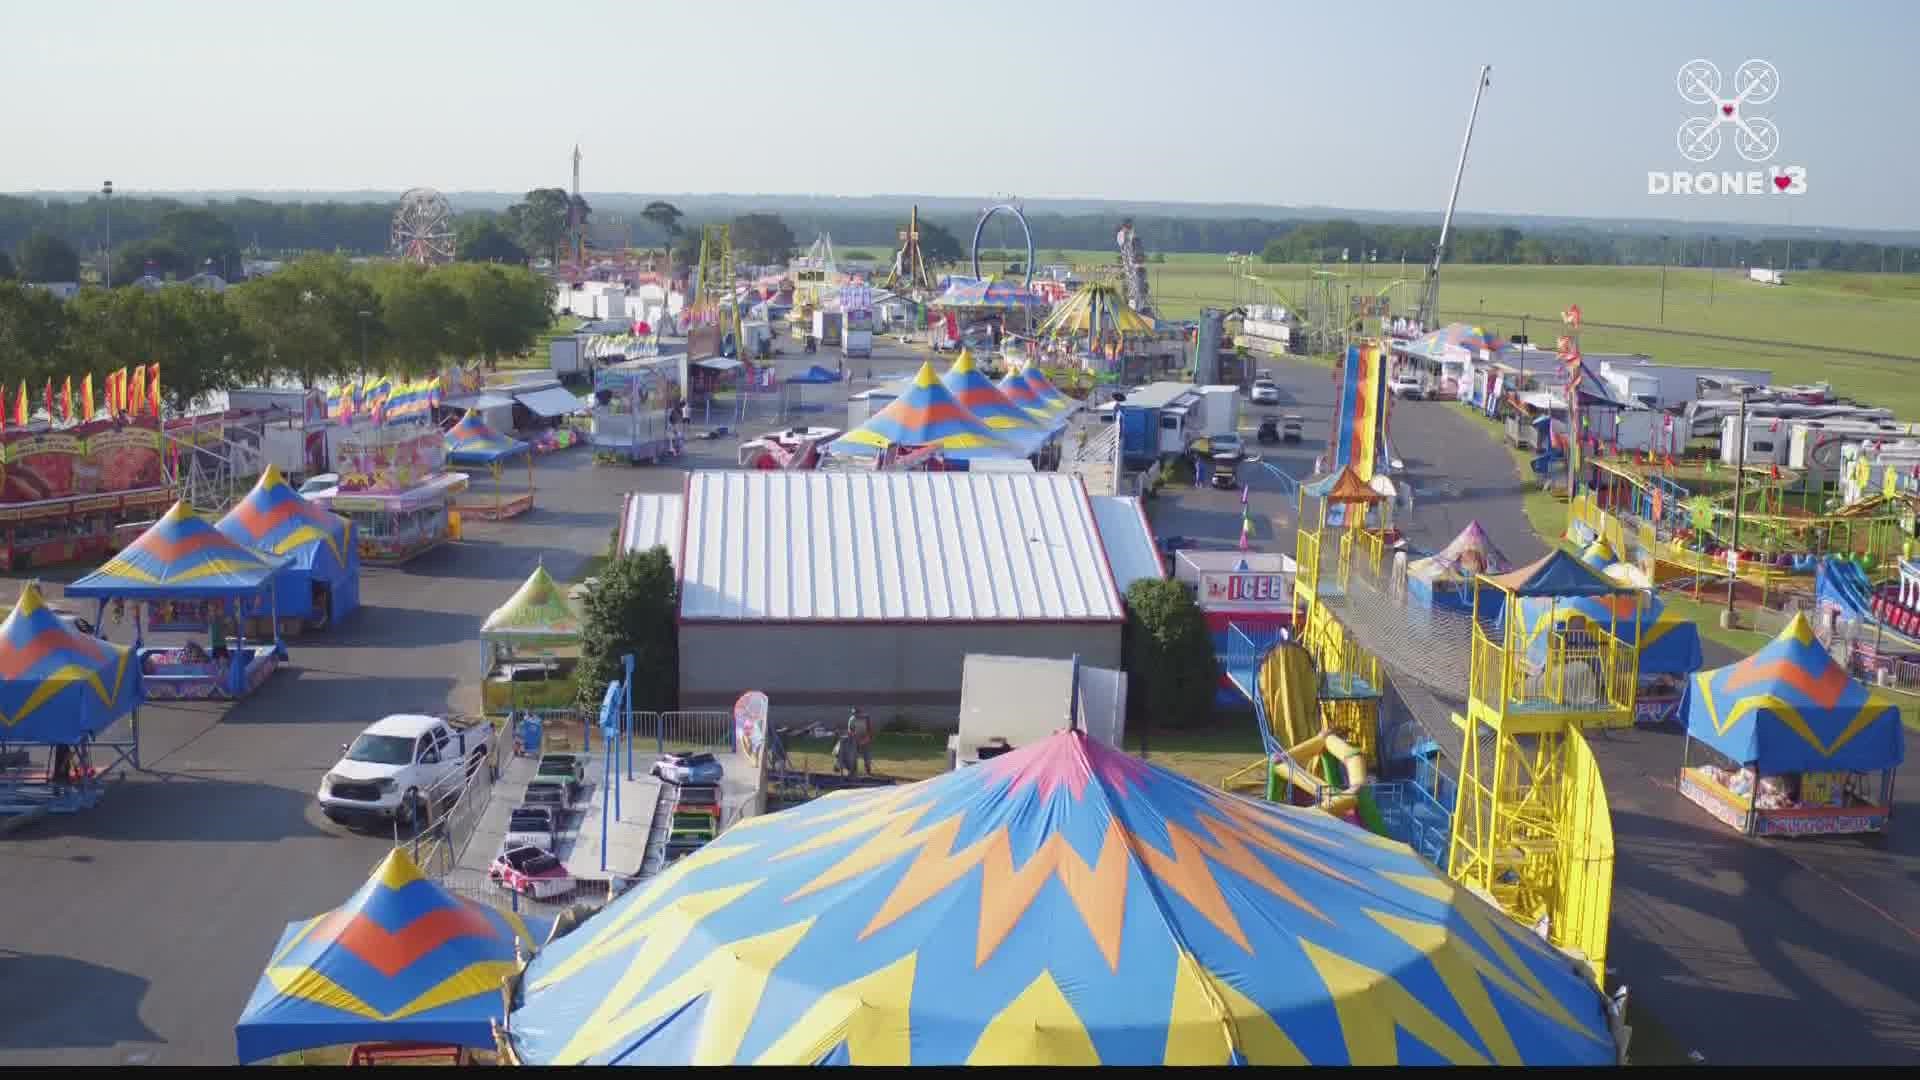 Changes coming to the National Fair in 2022